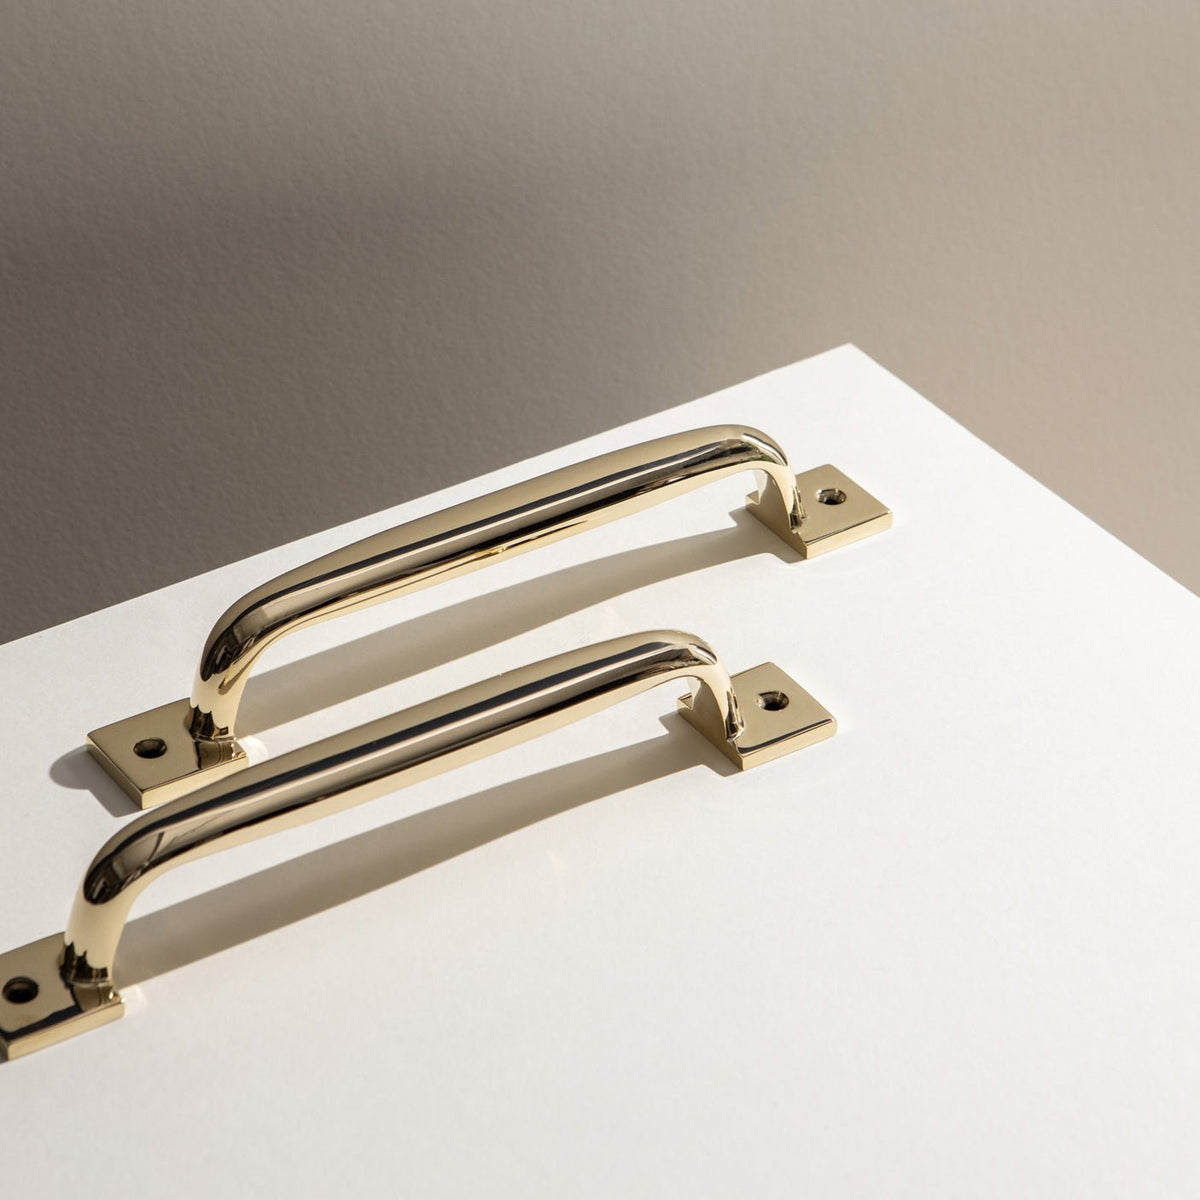 Polished Brass Unlacquered : Finish in Focus - Armac Martin